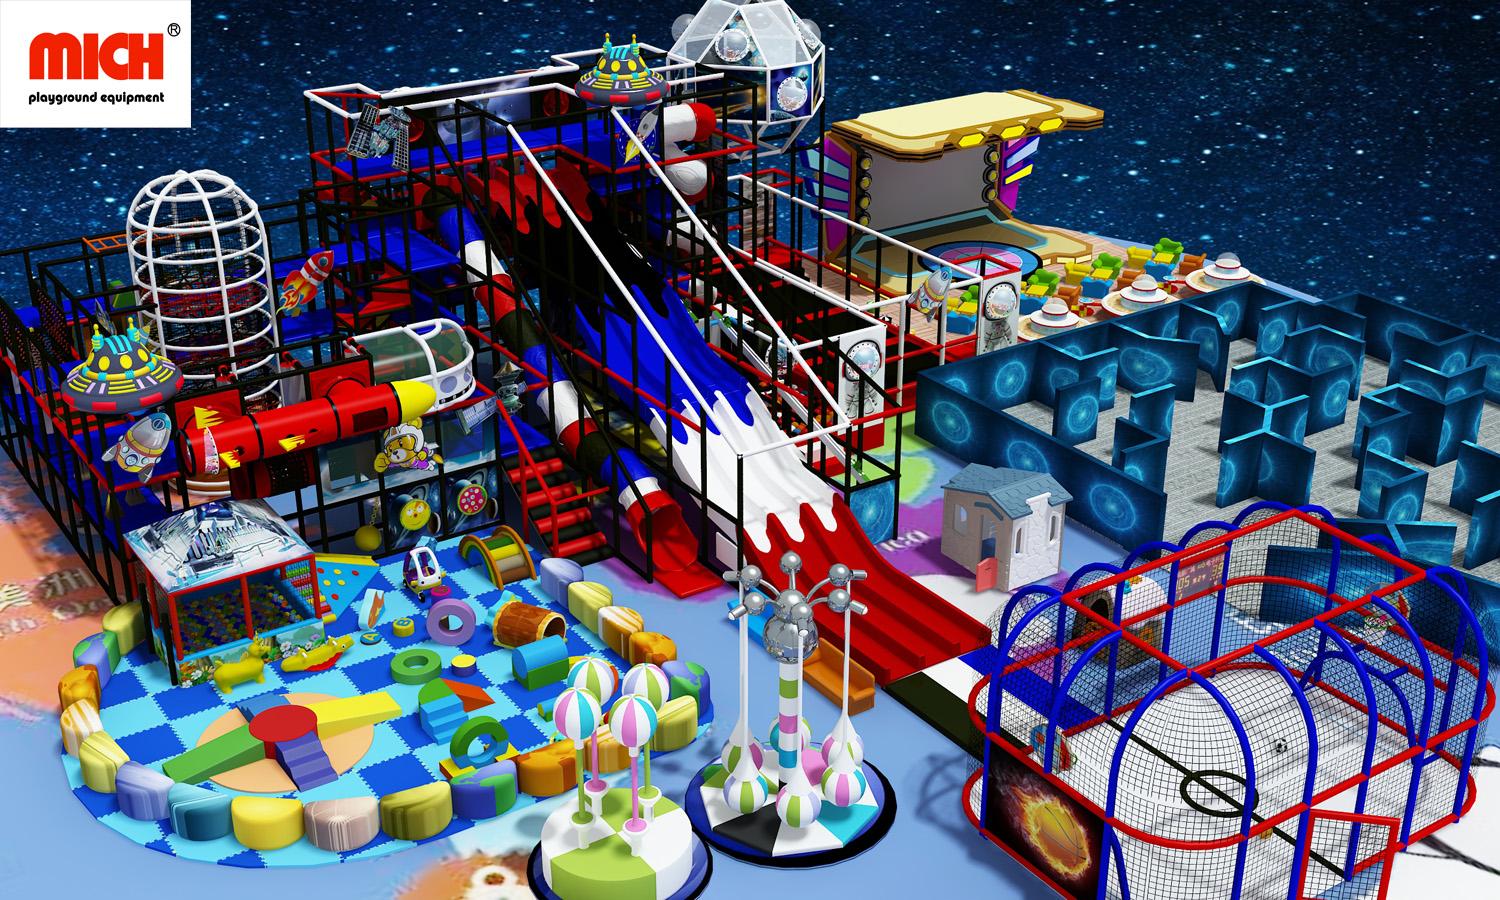 Big Space Theme Kids Indoor Play Center - Buy Space Theme Kids Play ...